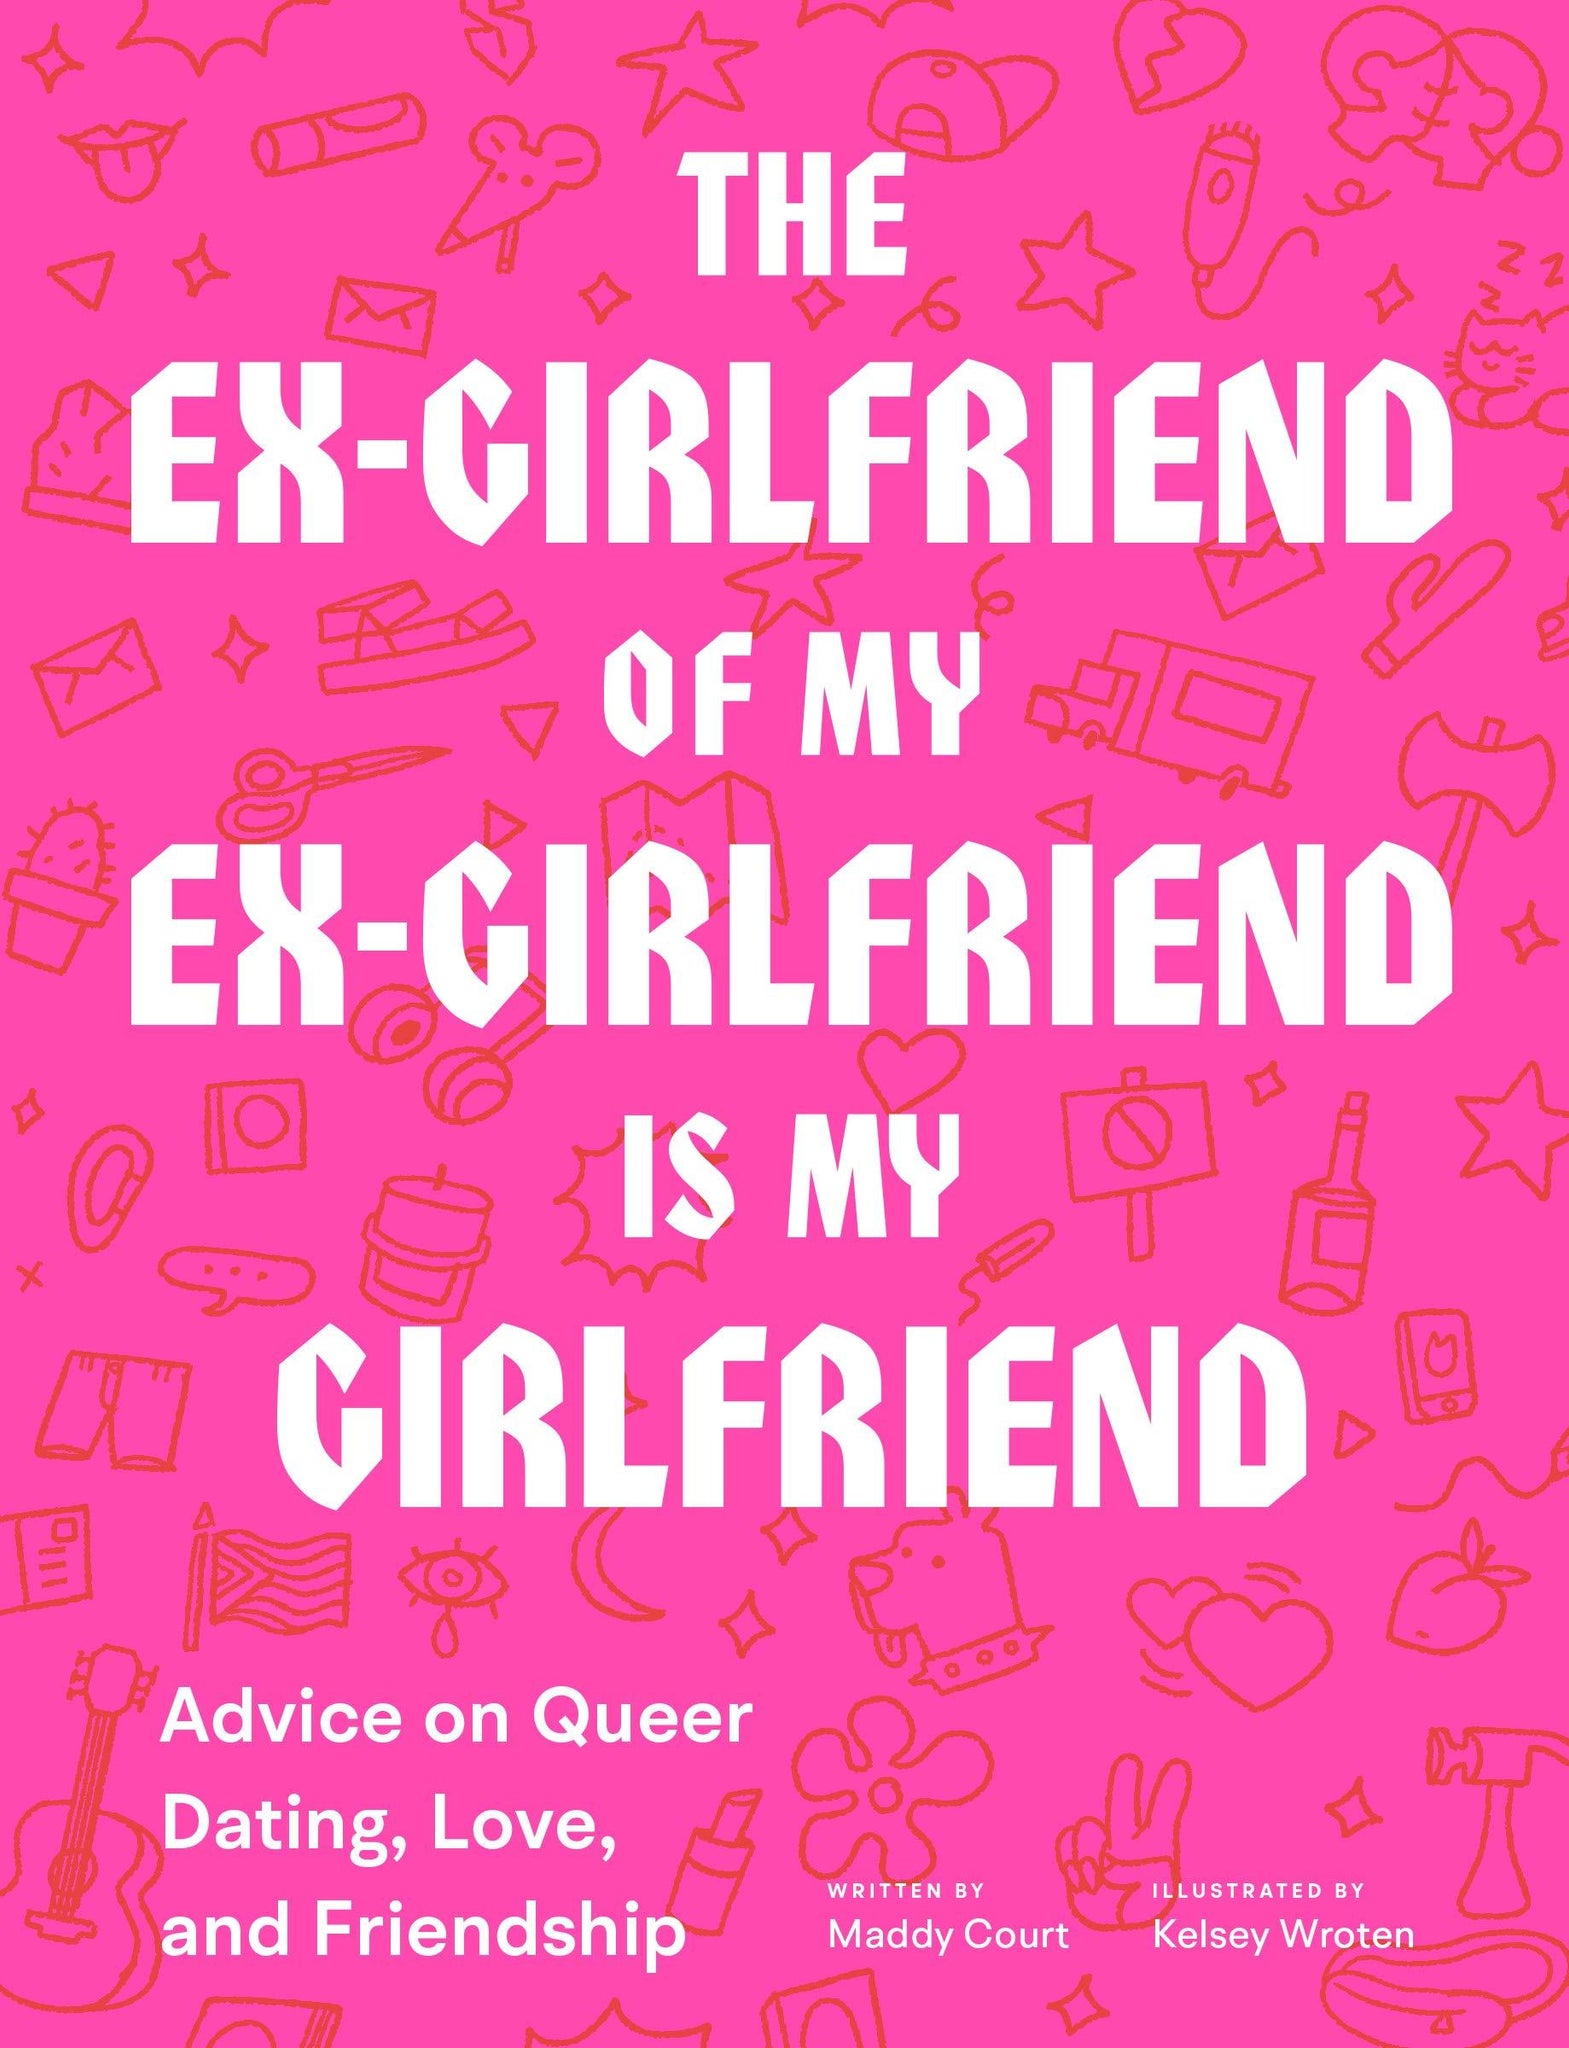 The Ex-Girlfriend of My Ex-Girlfriend Is My Girlfriend: Advice on Queer Dating, Love, and Friendship - ShopQueer.co